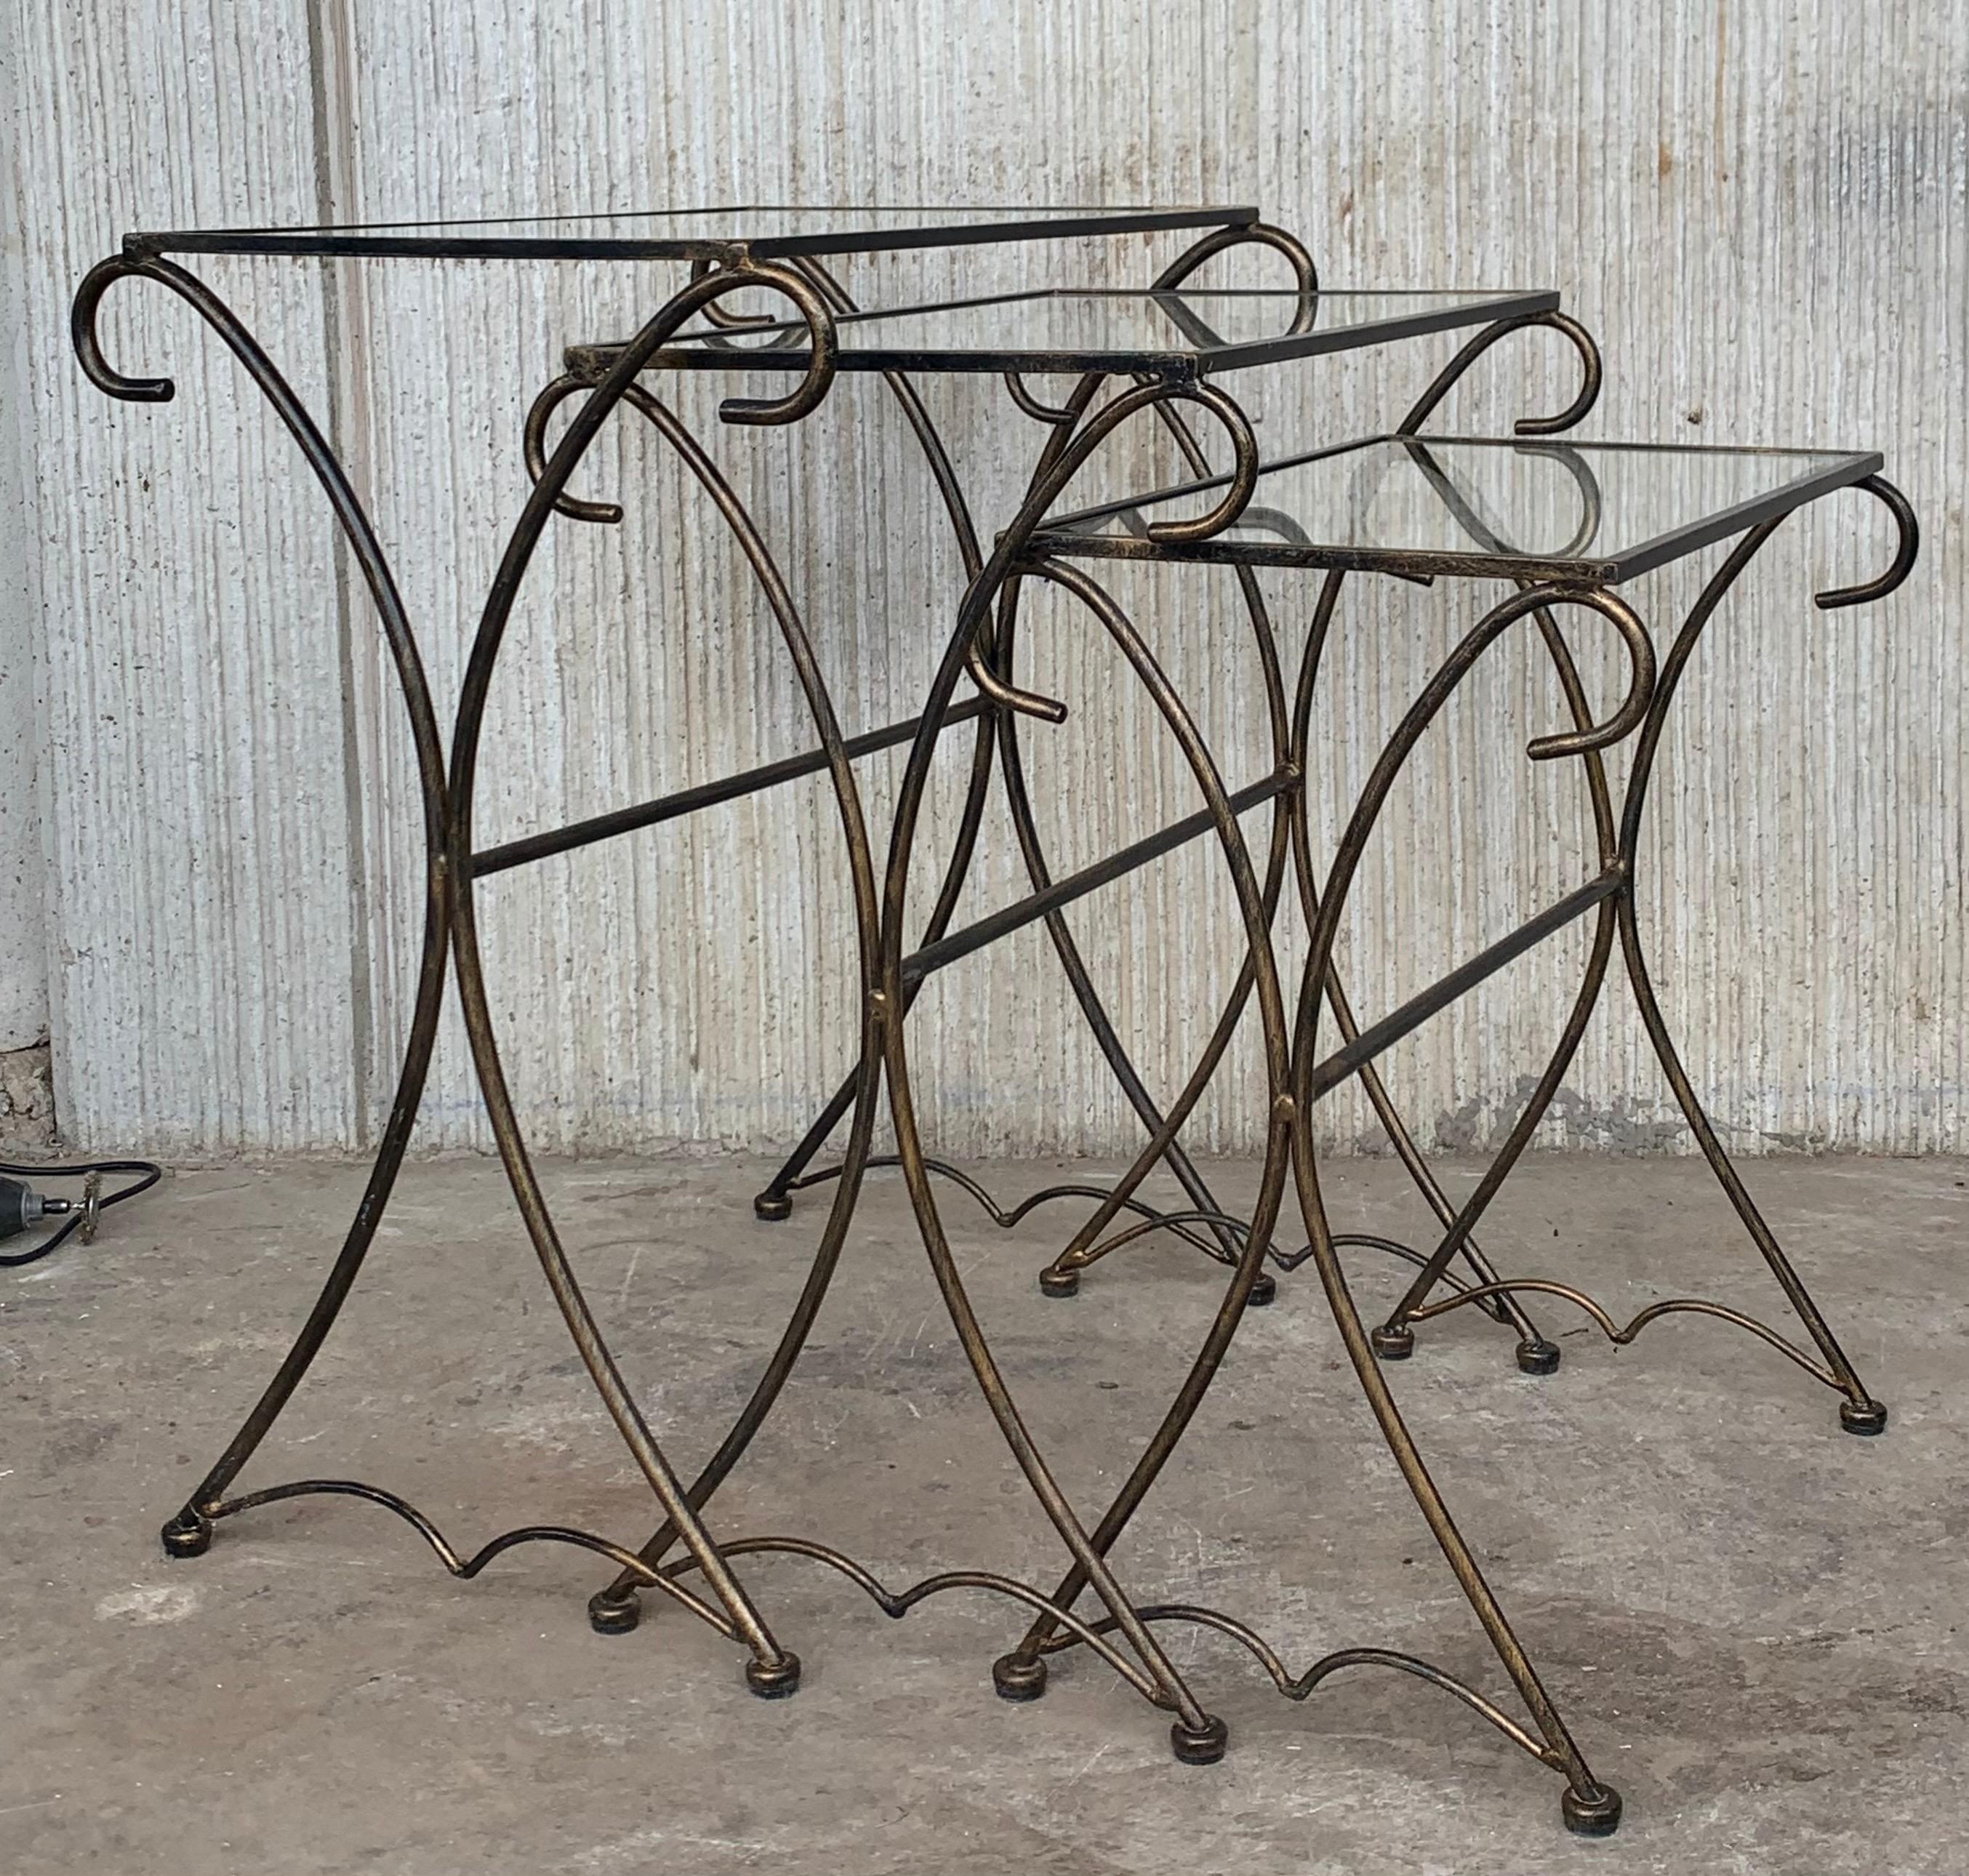 Original 1950s outdoor/patio nesting side table pair with iron scrolling base.
Stylish set of three stacking tables having exaggerated curved legs with metal mesh tops. All three are in very good original condition, showing only light cosmetic